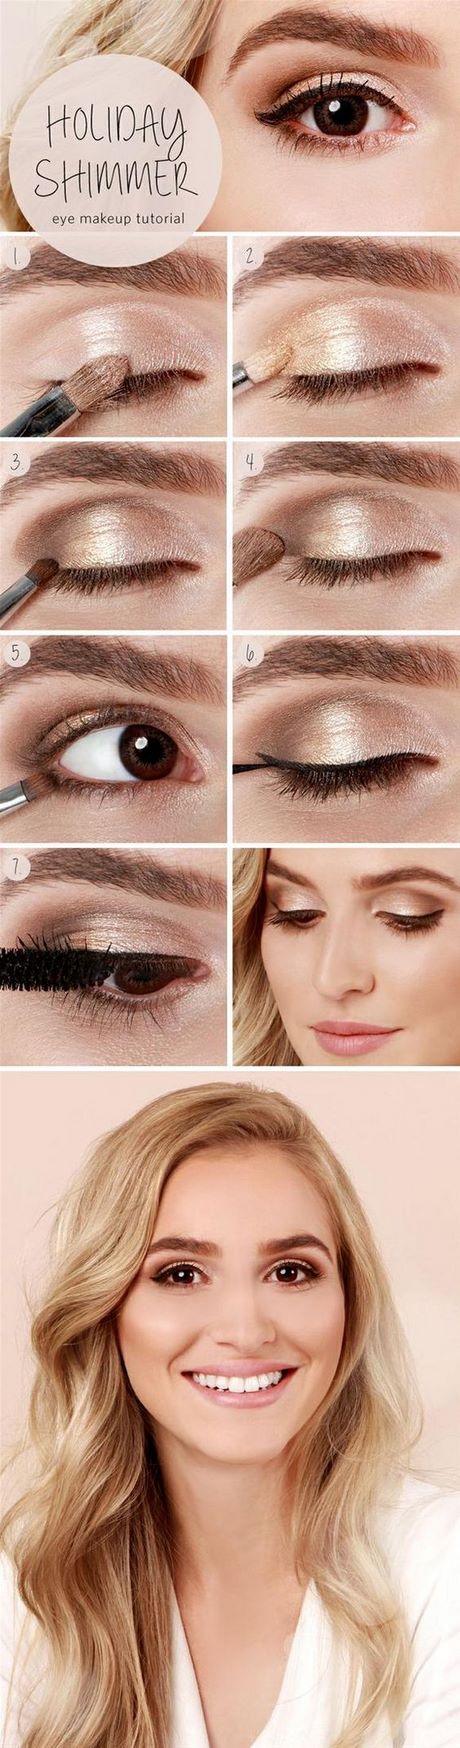 date-night-gold-and-browns-makeup-tutorial-64_8 Datum nacht goud en browns make-up tutorial